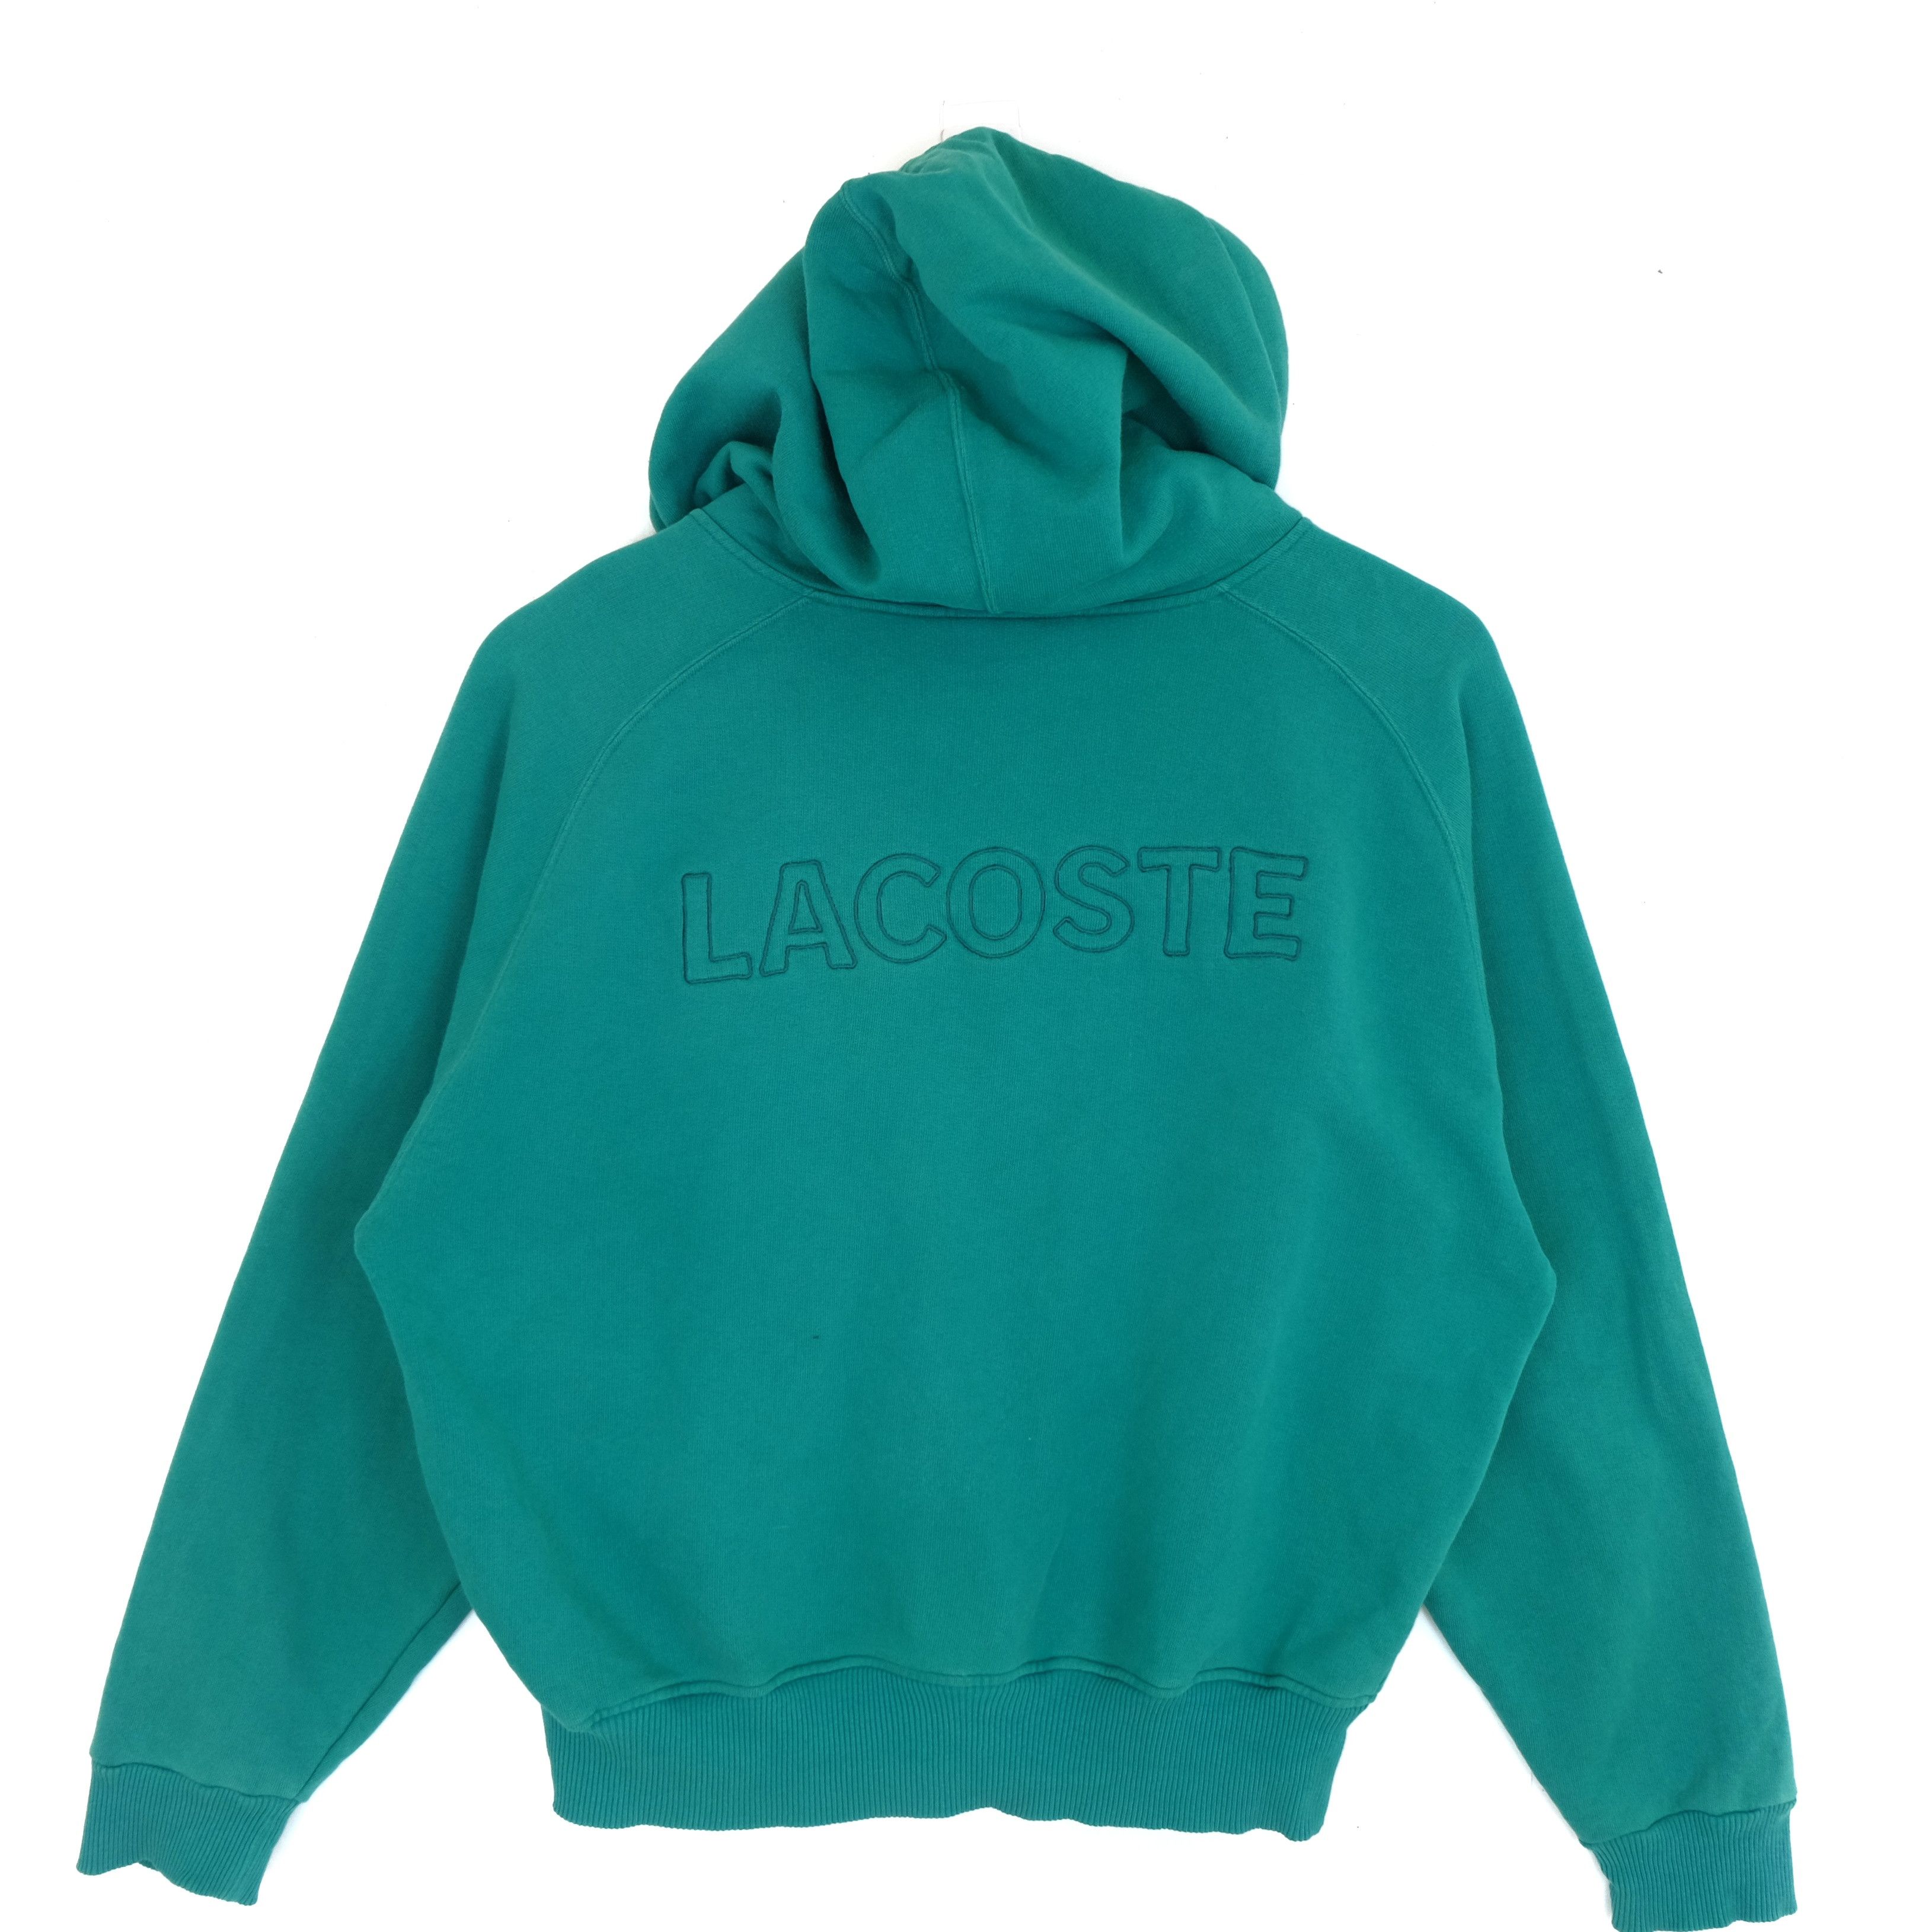 Lacoste LACOSTE Big Spell Out Logo Hoodie Size XL / US 12-14 / IT 48-50 - 8 Thumbnail